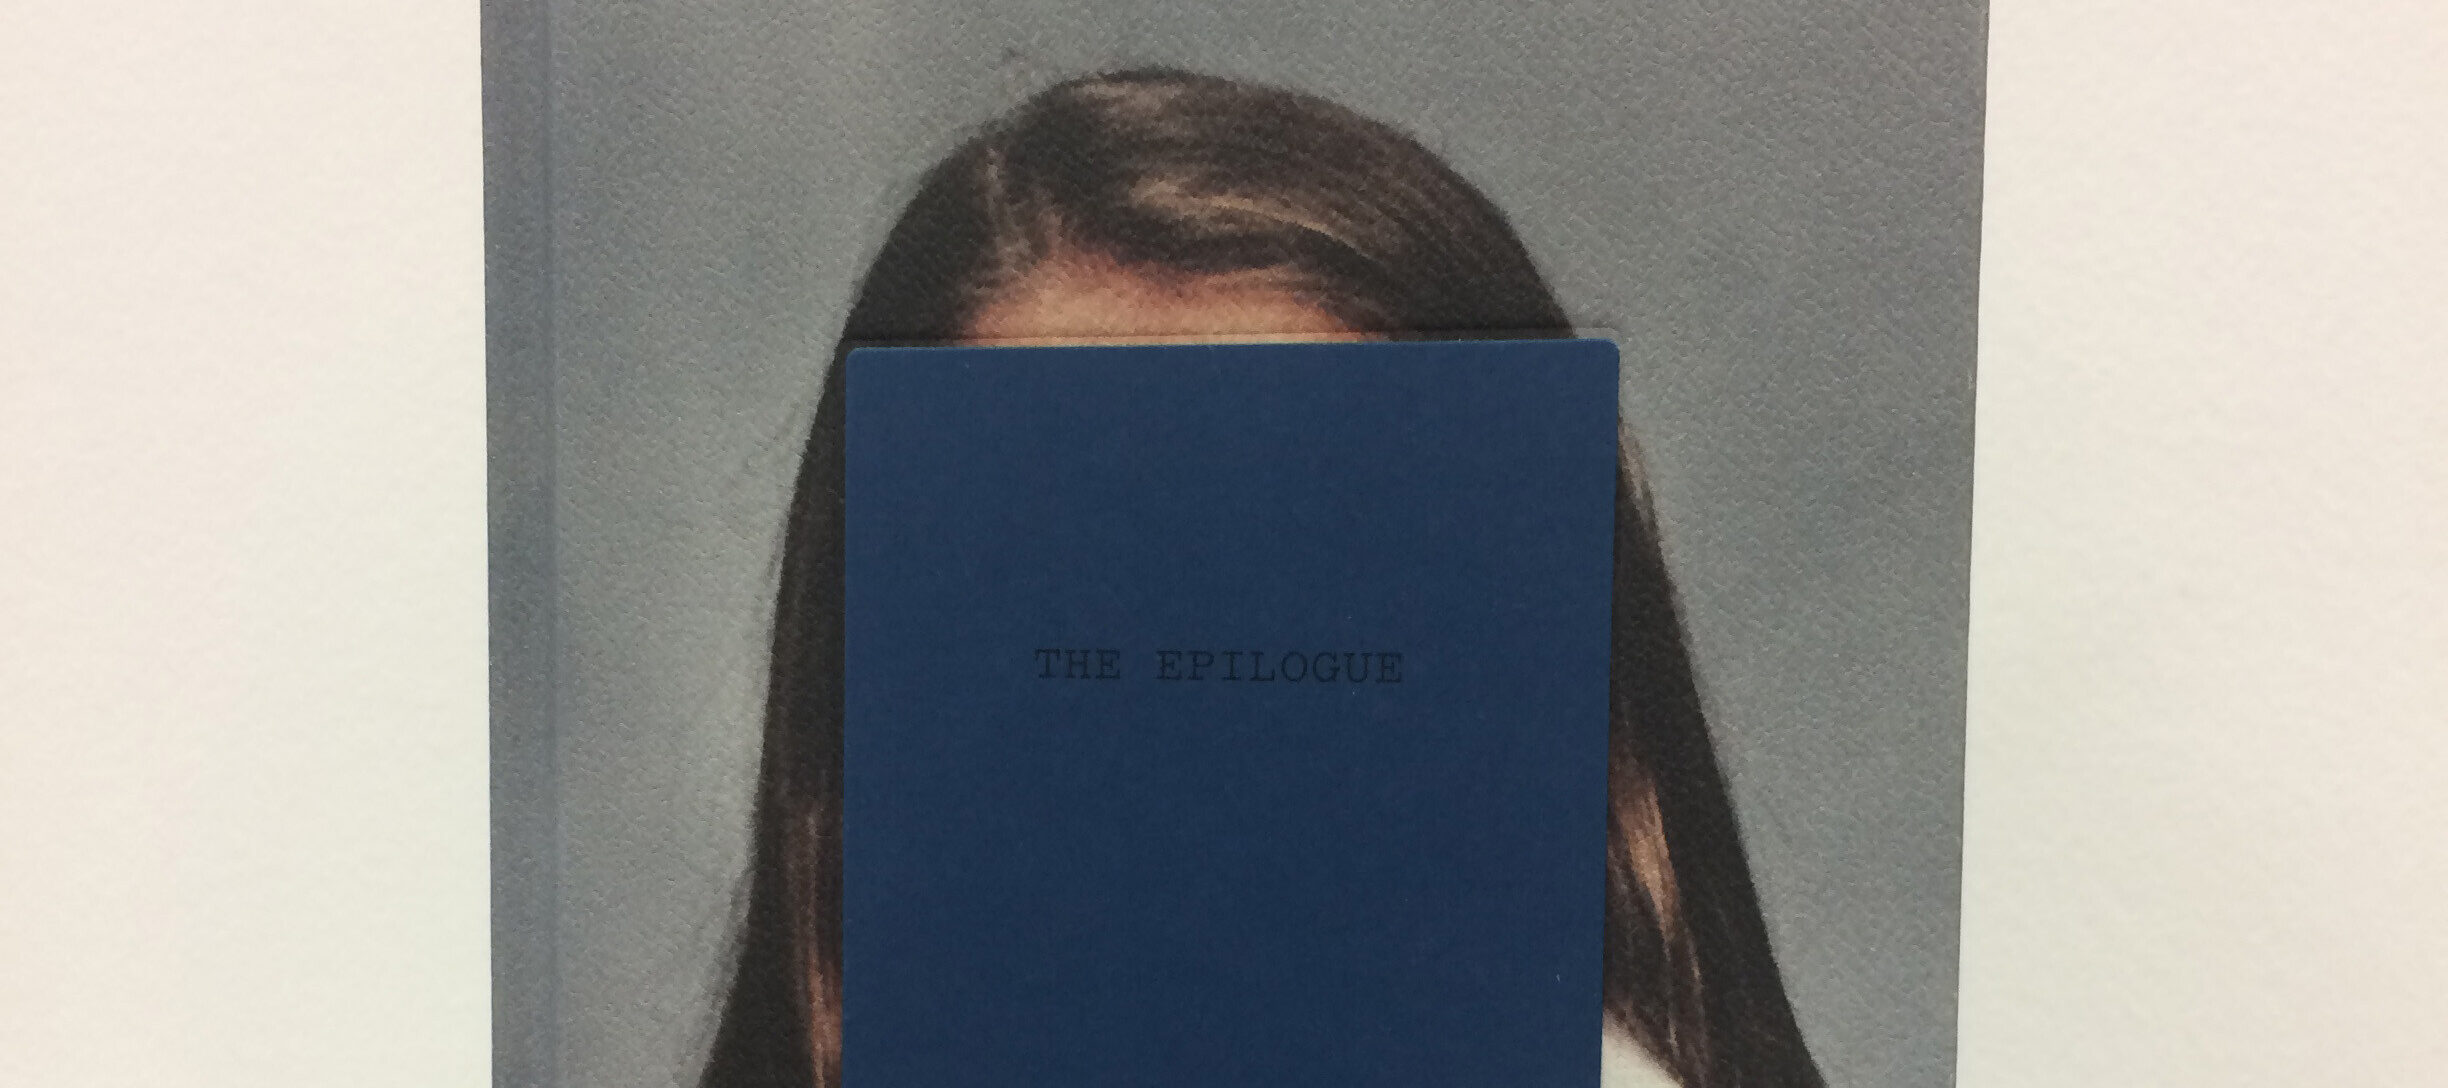 Front cover of a book featuring a color photograph portrait of a figure with long brown hair. The figure's face is obscured by rectangle on which the book's title 